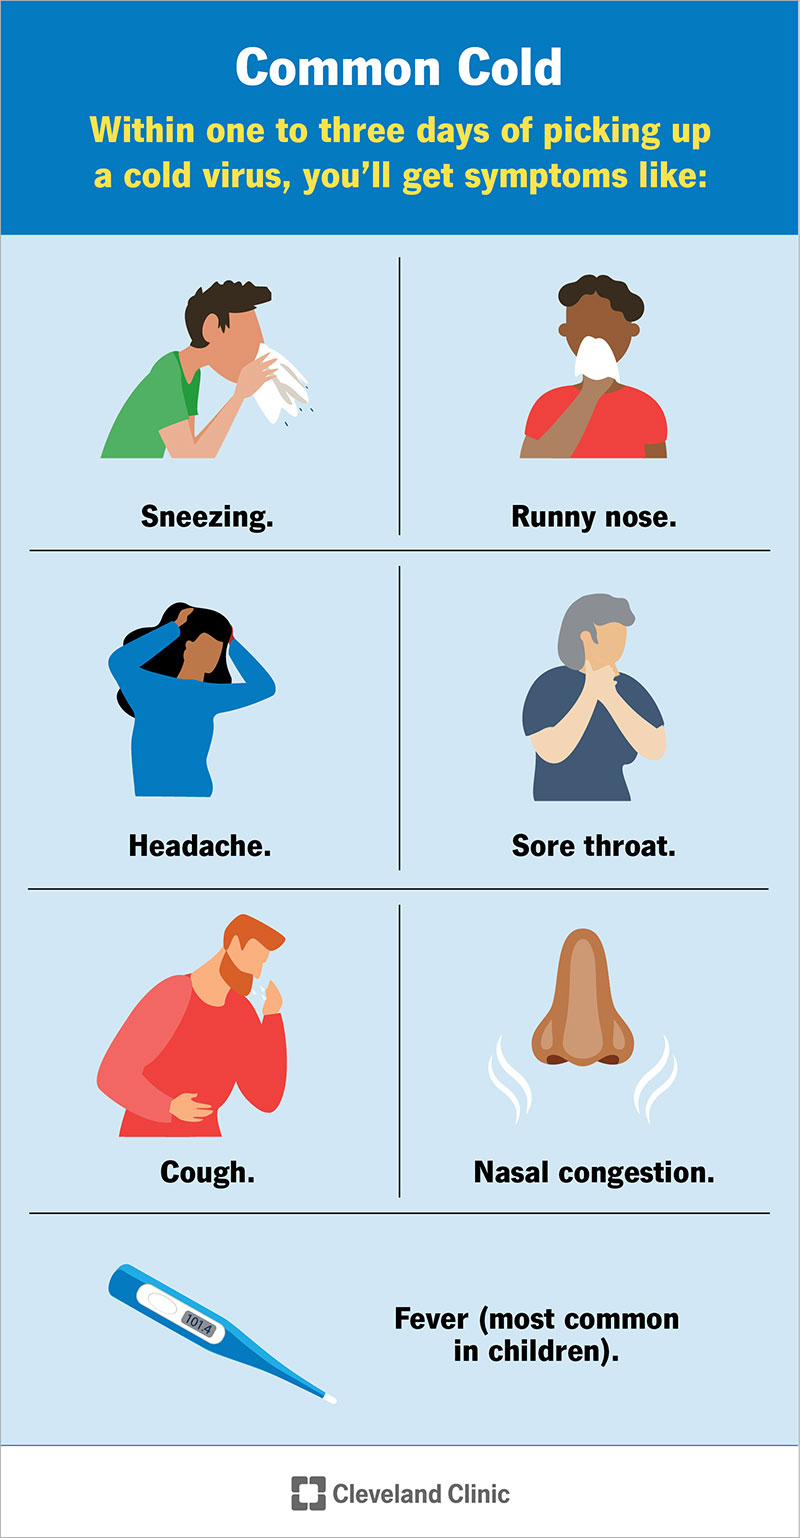 The first sign of the common cold is often a sore throat. Other early symptoms may include runny nose, sneezing and coughing.